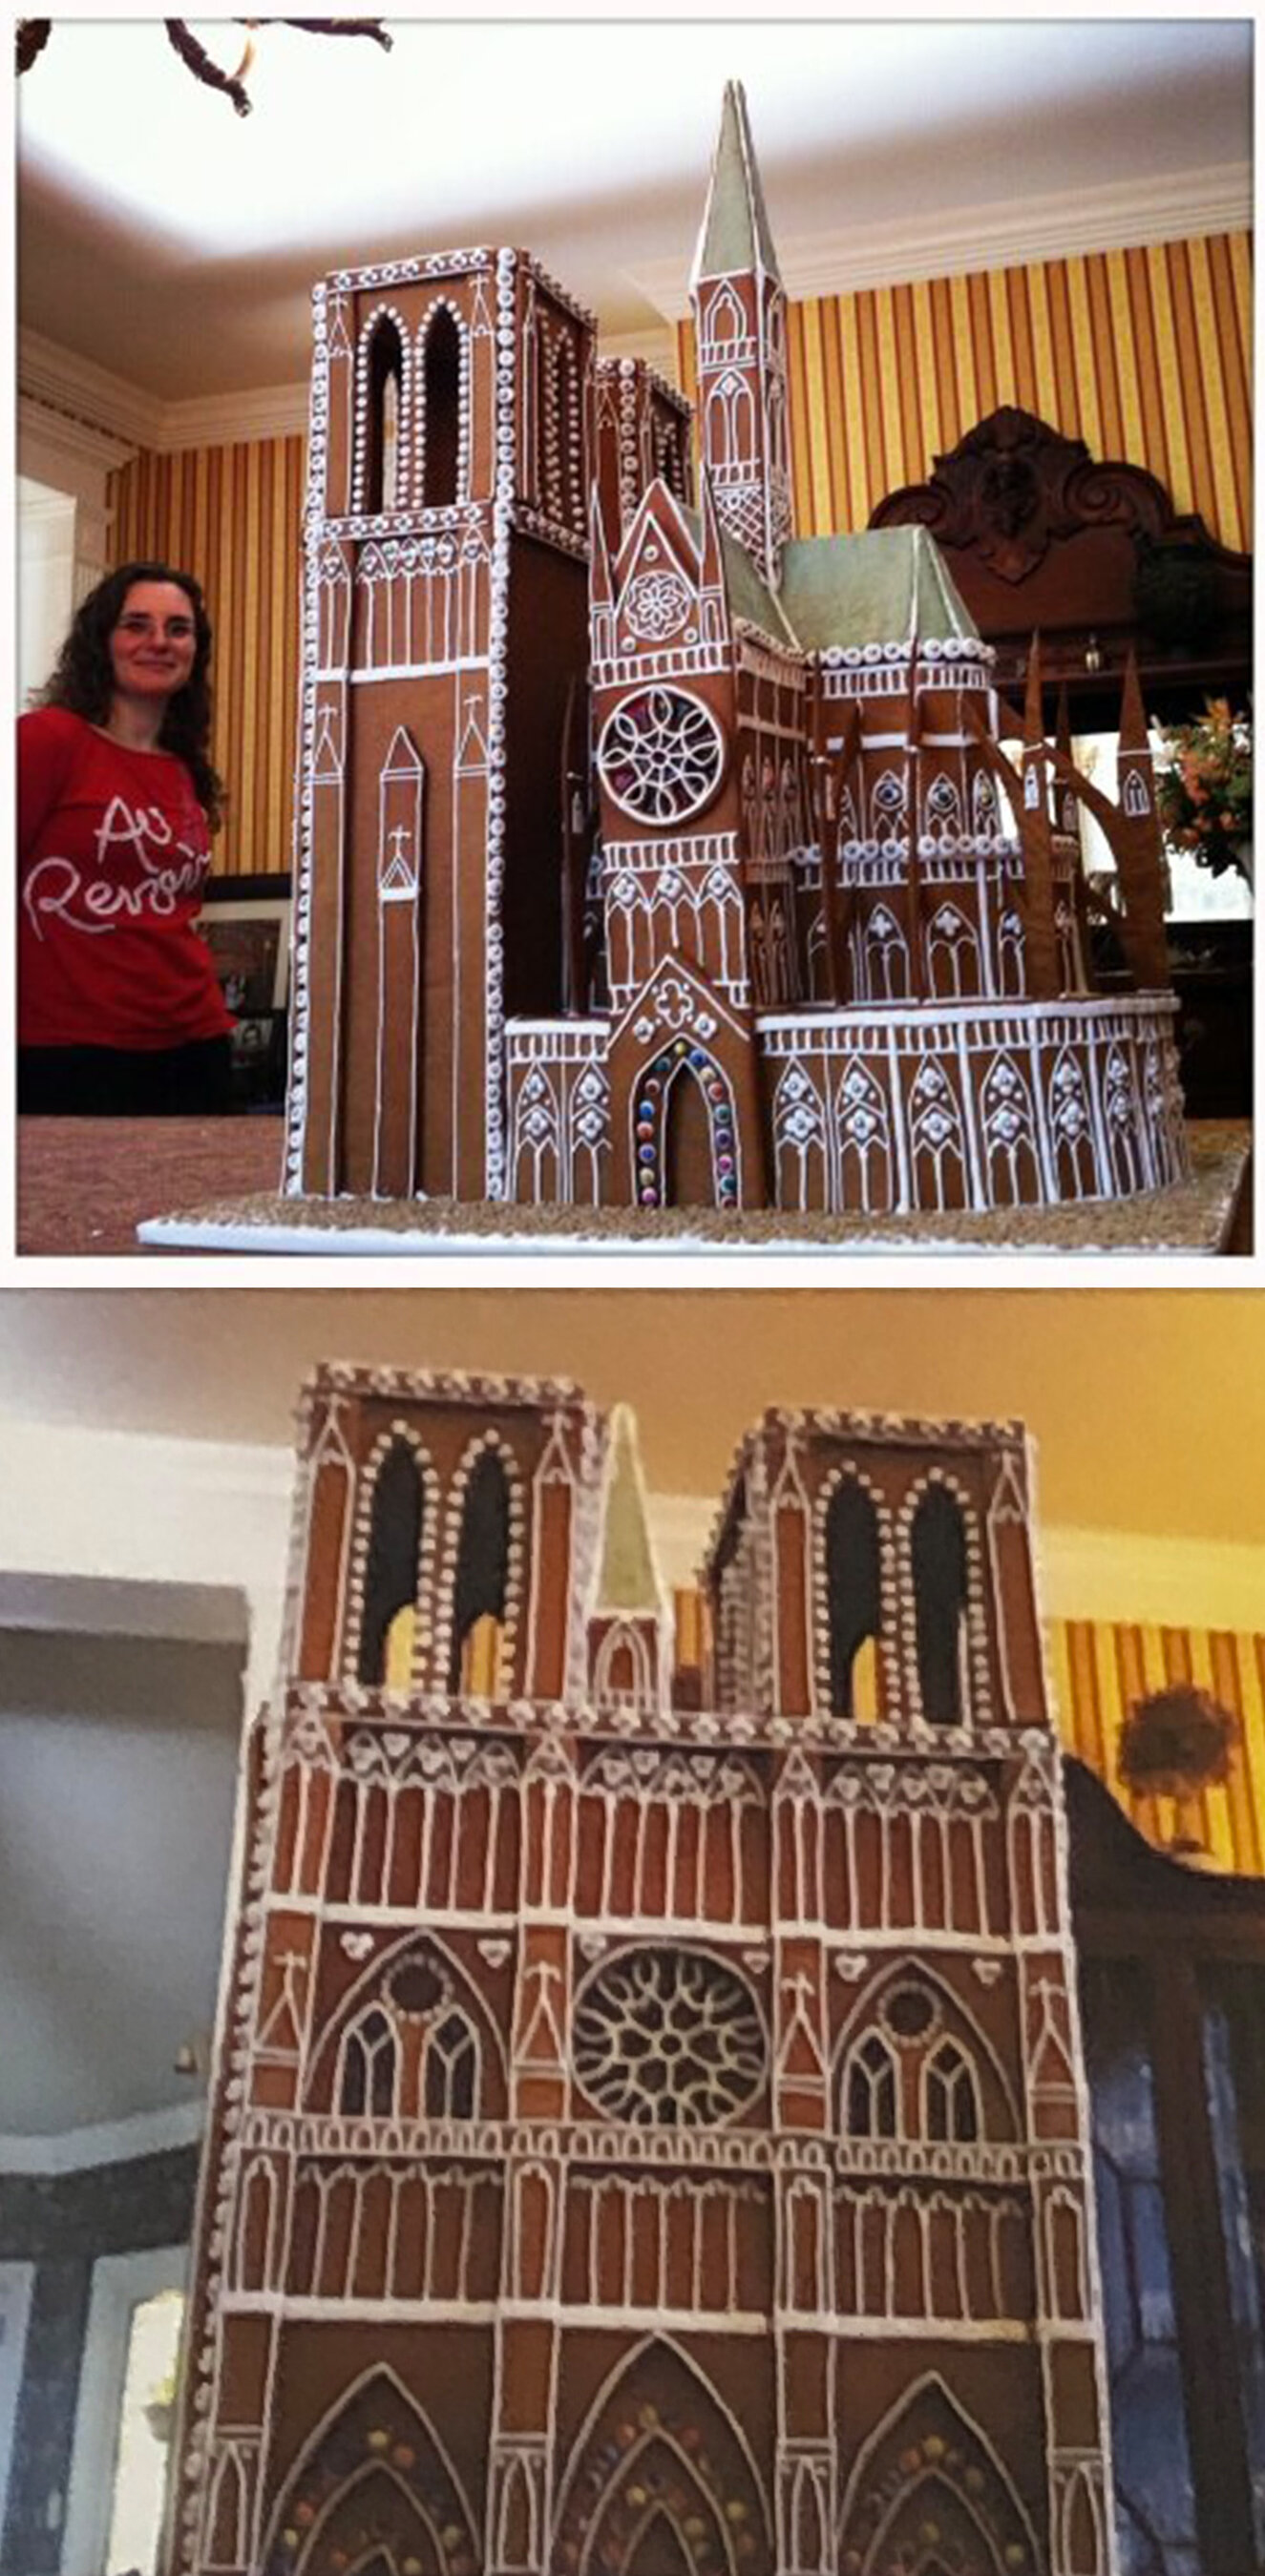  Jennifer Roth (PiV ‘92),  Notre Dame Cathedral in Gingerbread , 2012. Gingerbread, royal icing, candy, dried beans, 3 x 3 x 4 ft. 